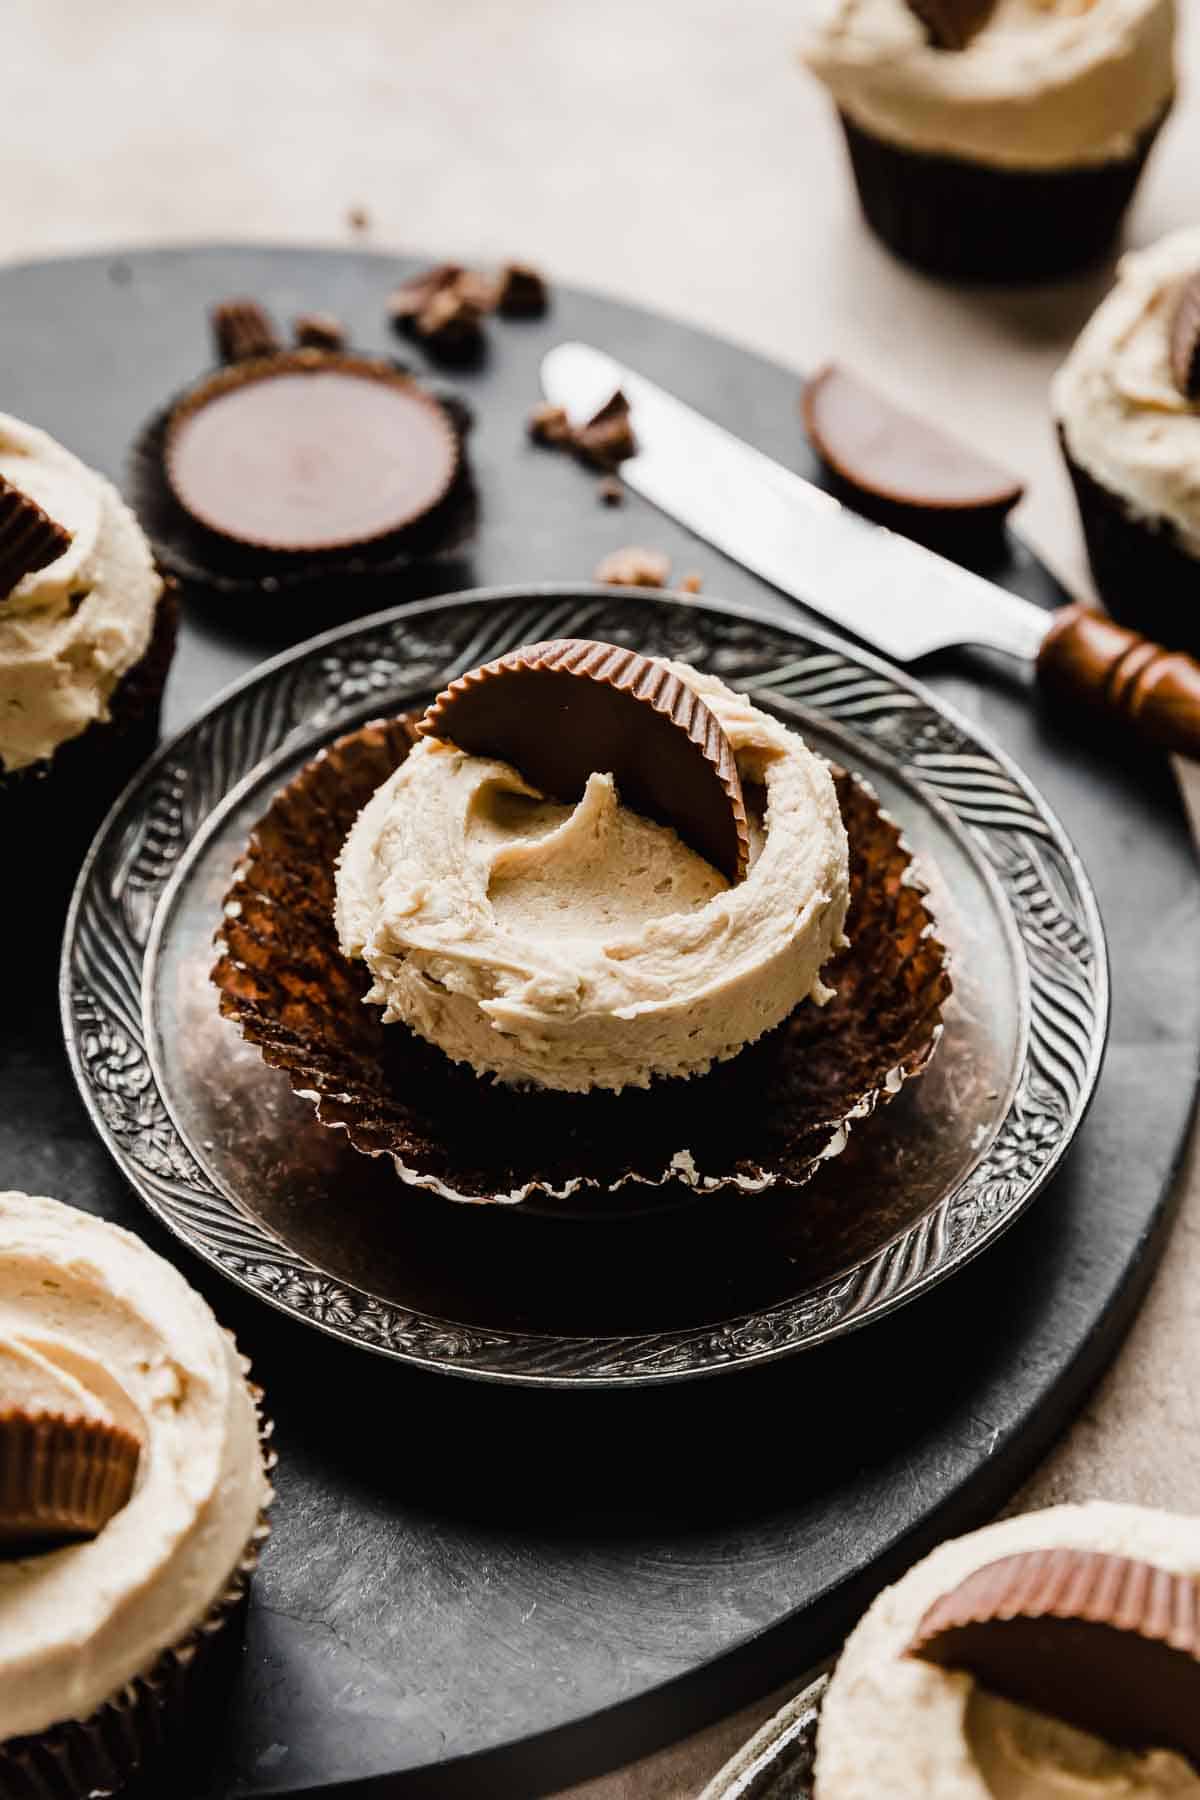 A Reeses Cupcake topped with peanut butter frosting and half of a Reese's peanut butter cup.